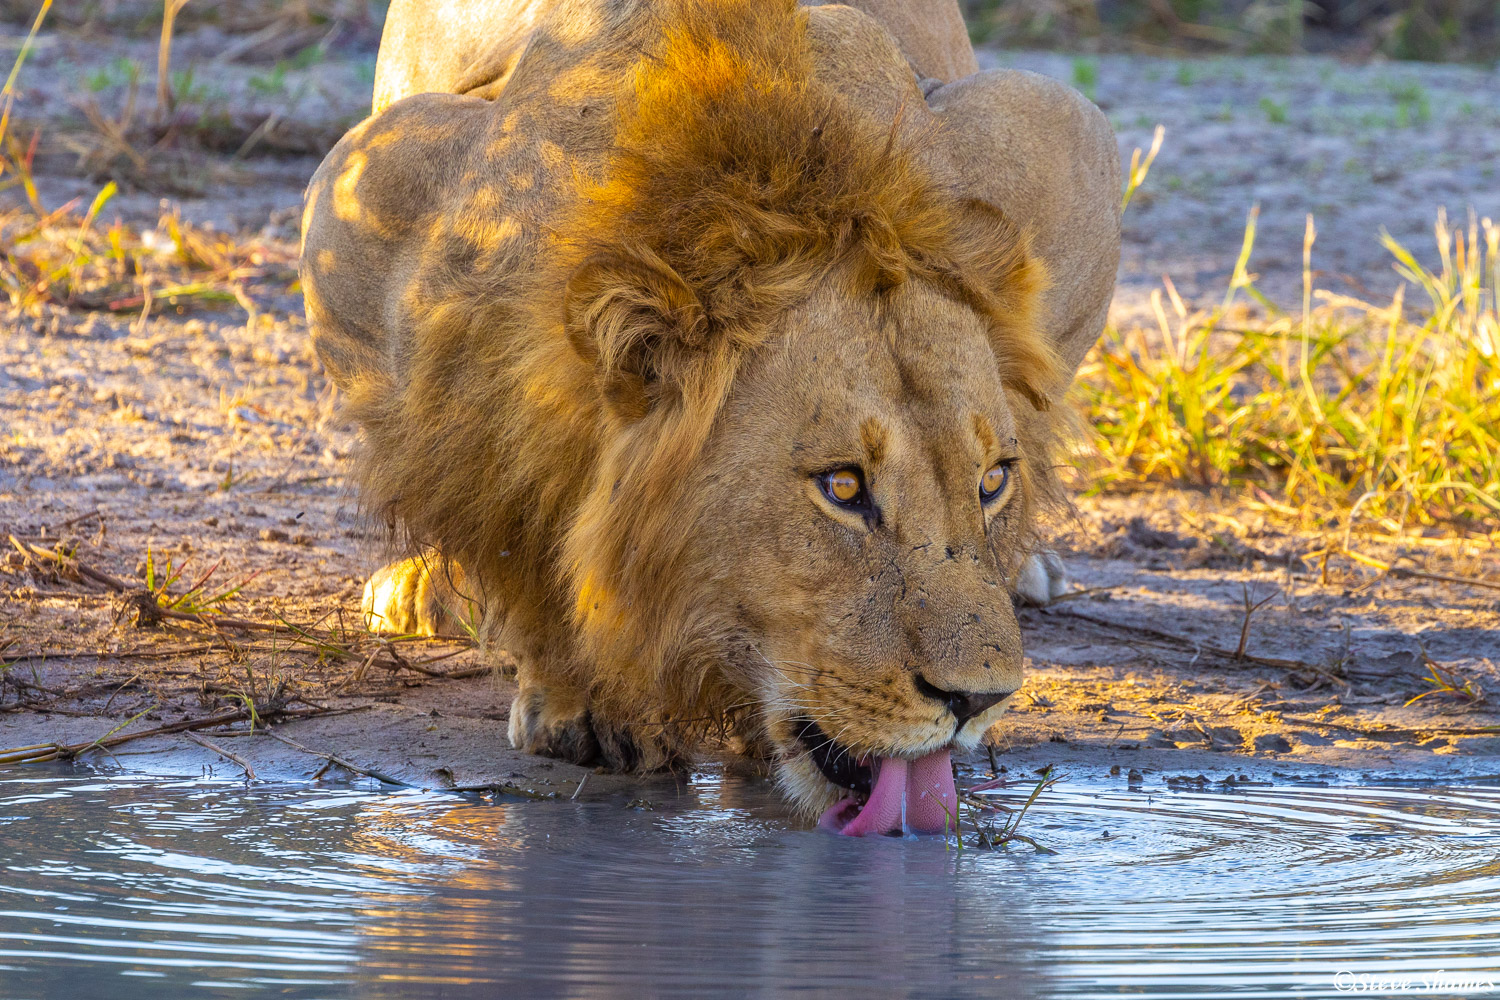 Drinking lion, at the local waterhole.